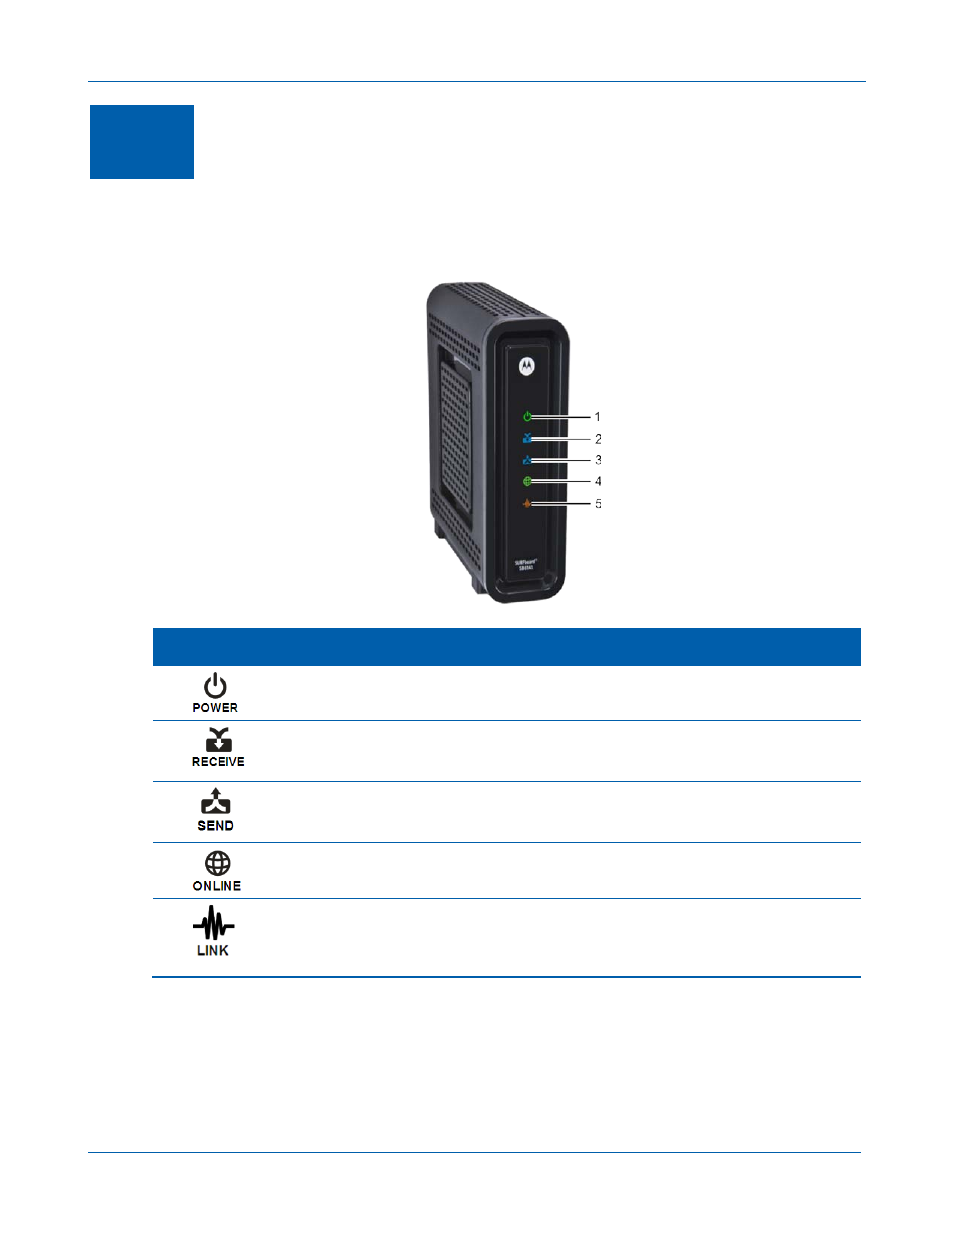 Product overview, Front panel | ARRIS SB6141 User Guide User Manual